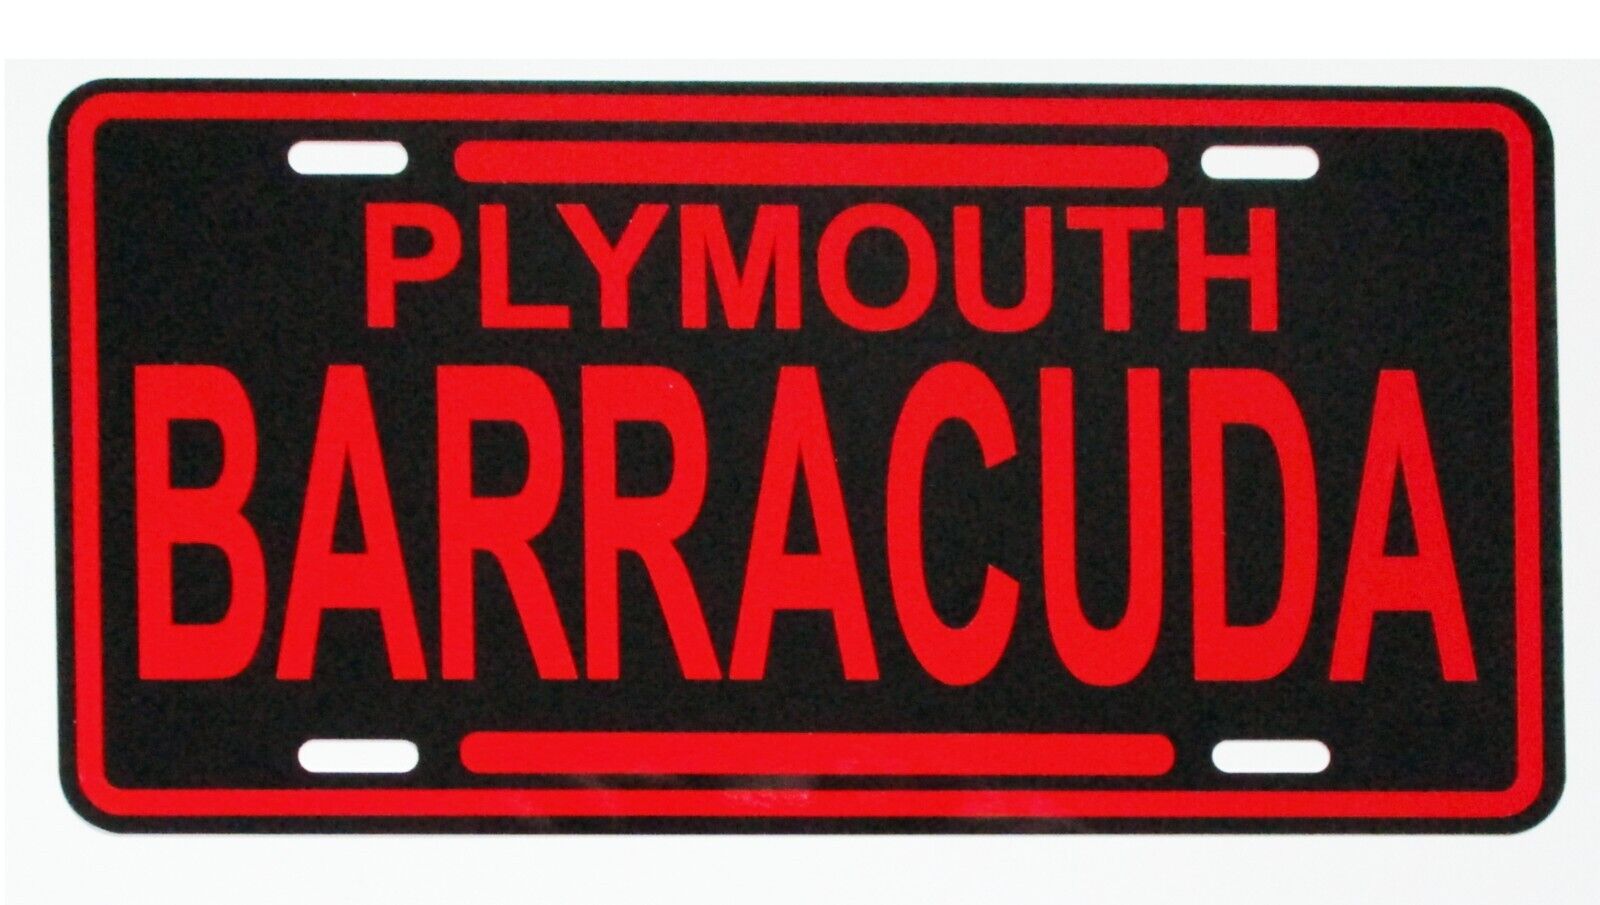 Plymouth Barracuda License Plate Aluminum tin sign 3 colors